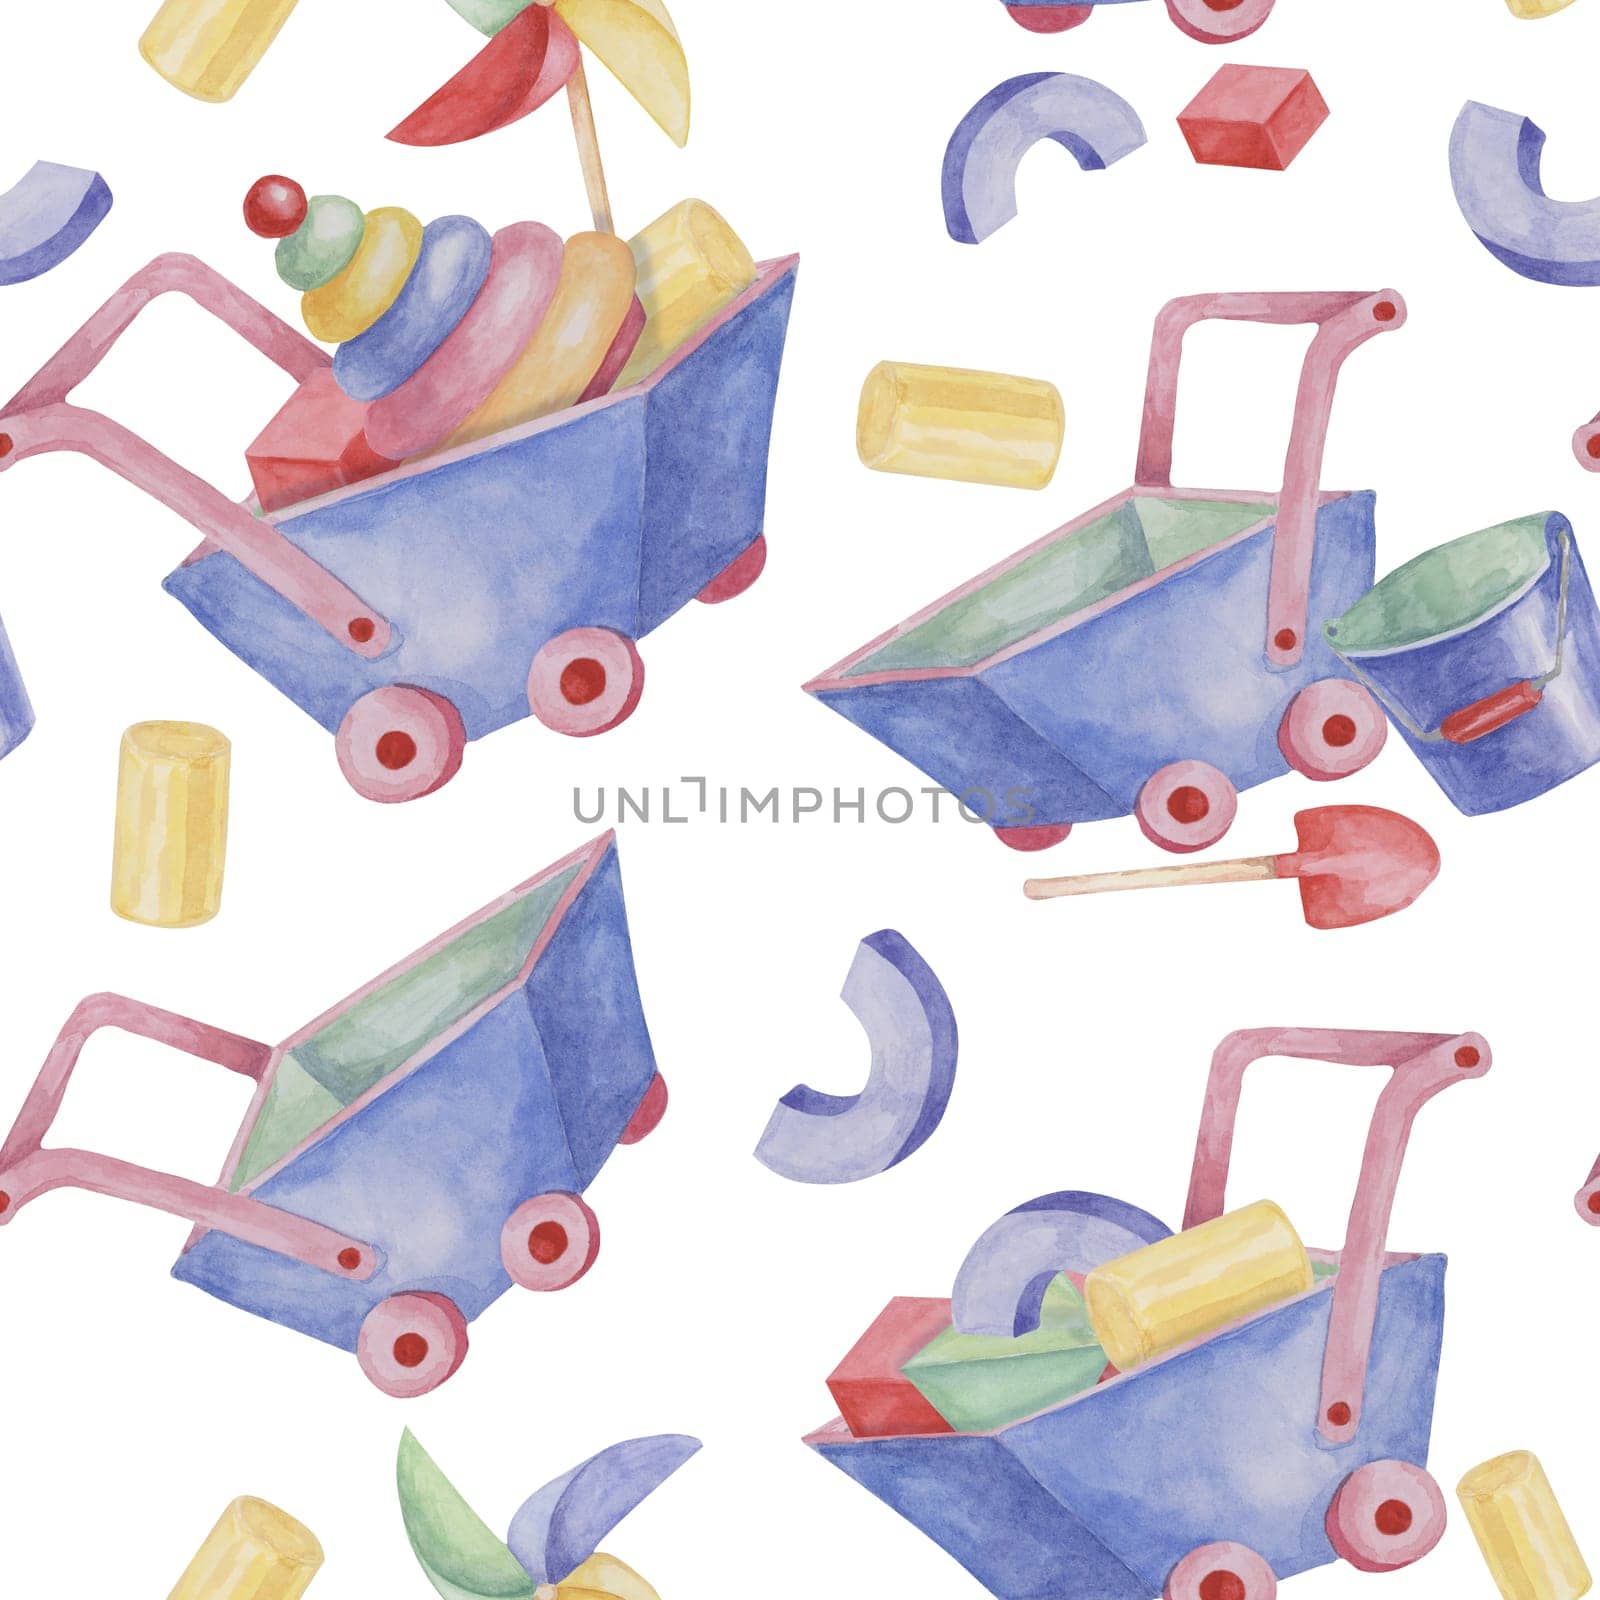 Baby seamless pattern with wheelbarrows, toys, bucket, shovel, stack rings, pinwheel in watercolor. Hand drawn textile for kids room, nursery, present by Fofito